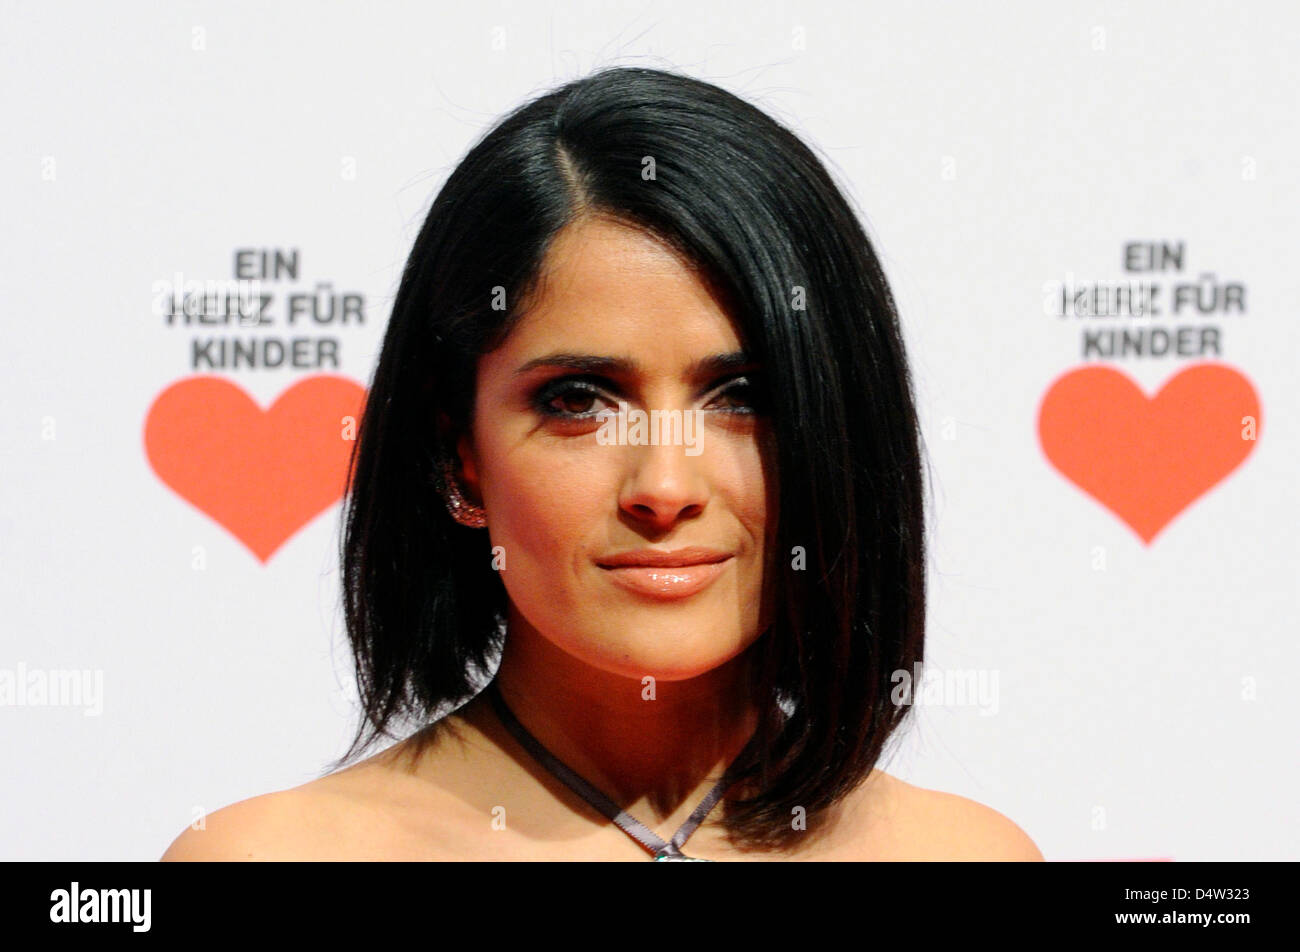 Mexican actress Salma Hayek at the charity gala 'A Heart for Children' ('Ein Herz für Kinder') in Berlin, Germany, 12 December 2009. German tv station 'ZDF' and tabloid 'Bild' staged the charity event in favour of German and international children aid projects. Photo: Jens Kalaene Stock Photo